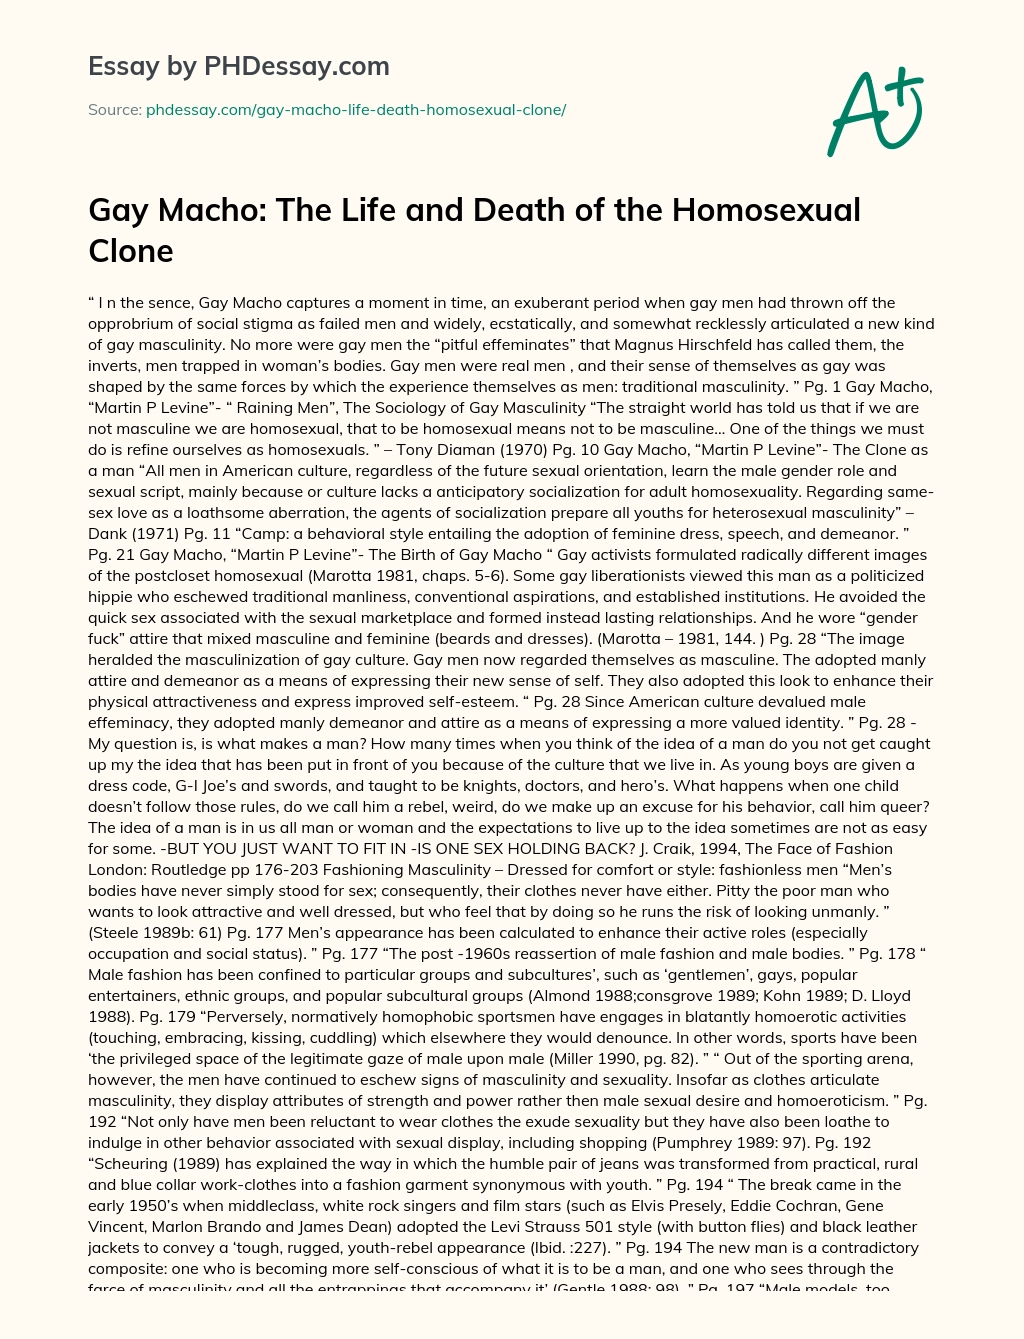 Gay Macho: The Life and Death of the Homosexual Clone essay